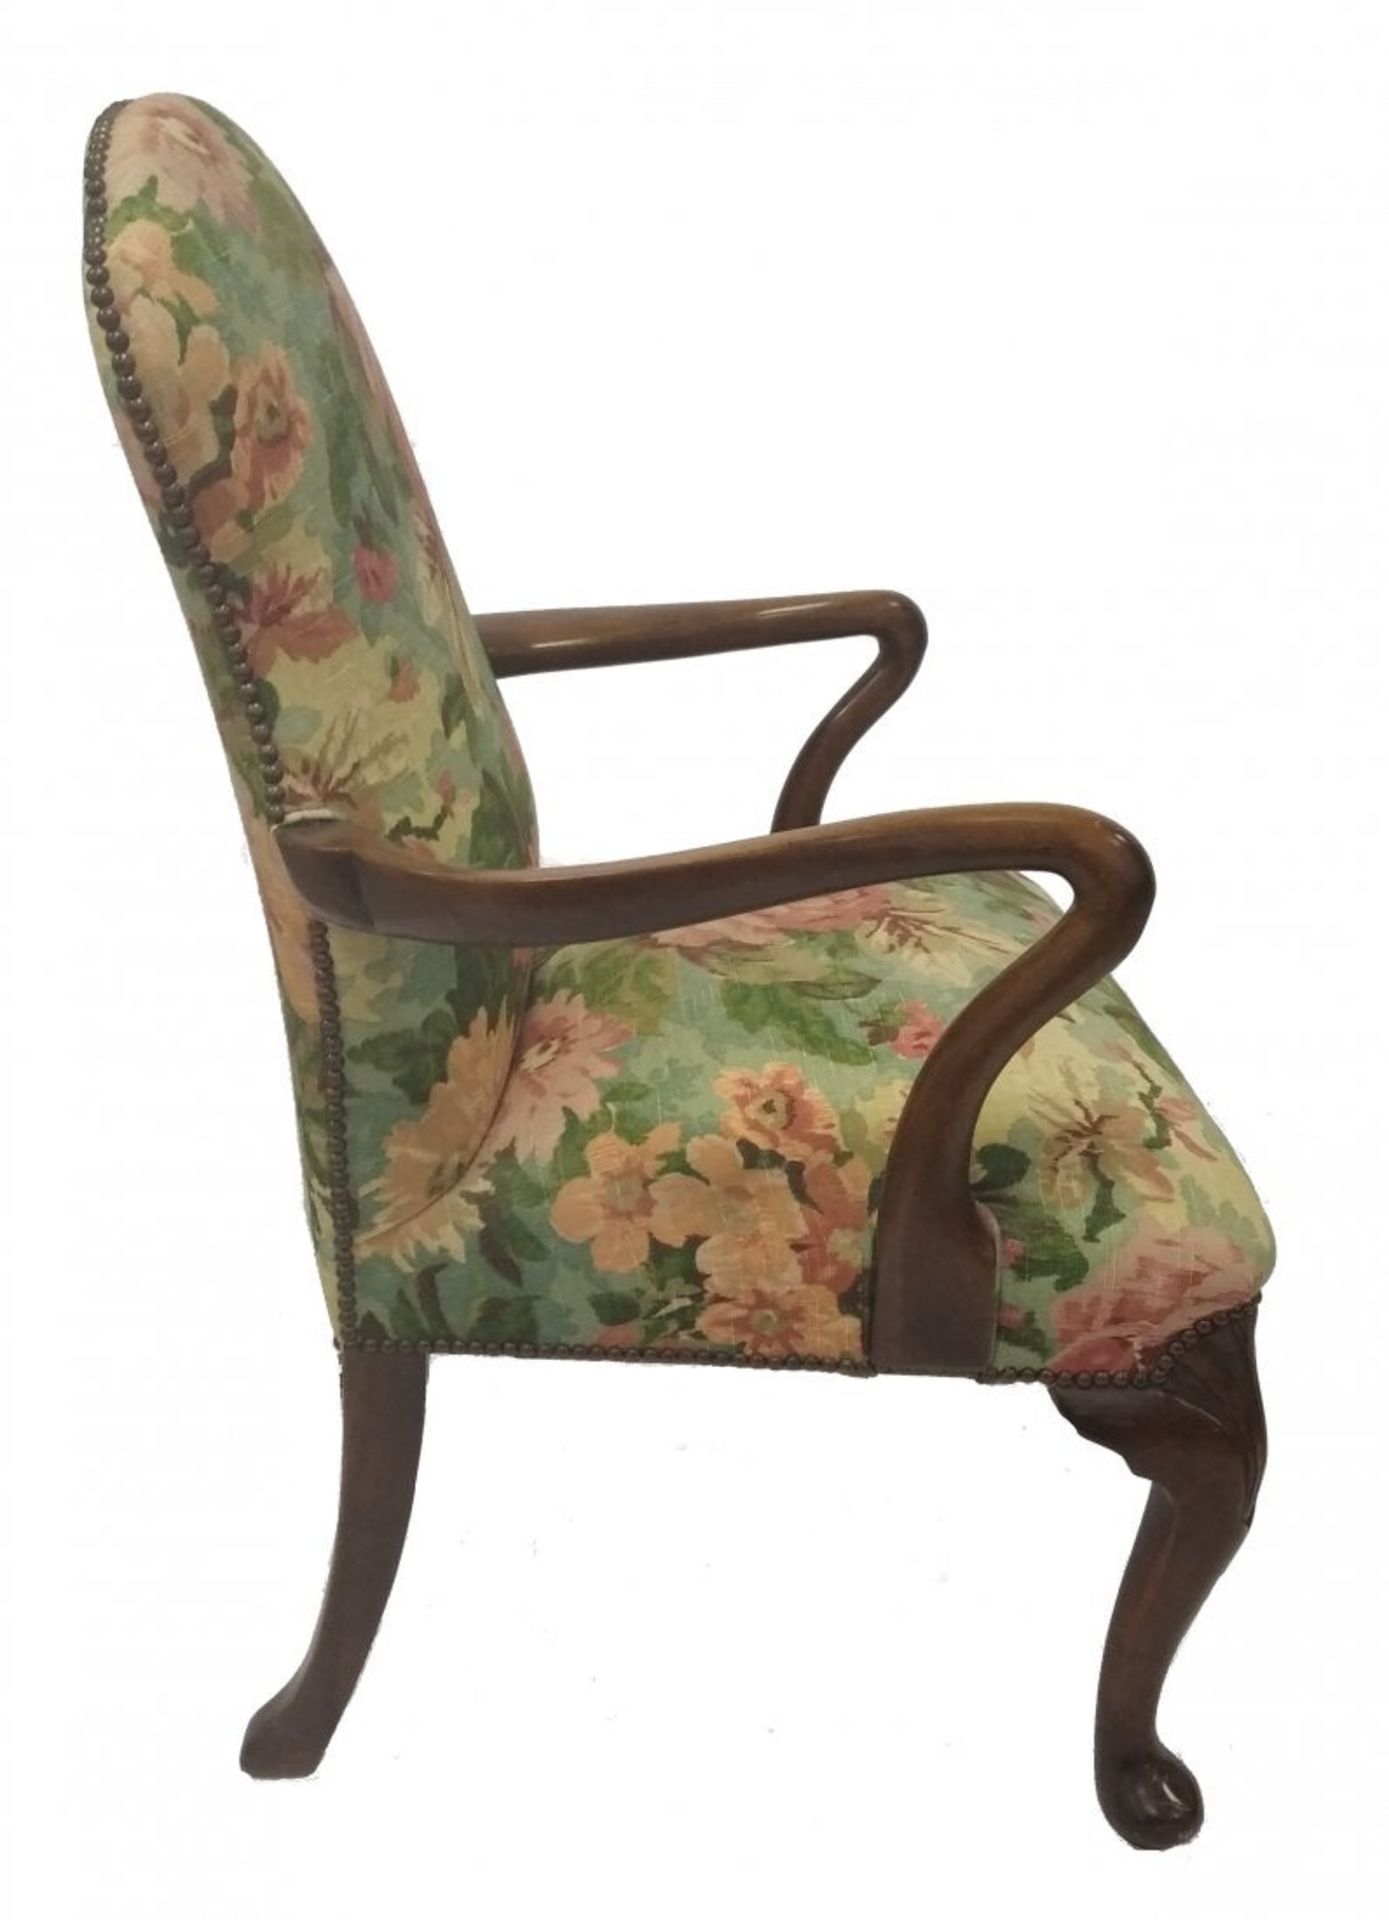 Armchair | Queen Ann Style | Mahogany - Image 2 of 4